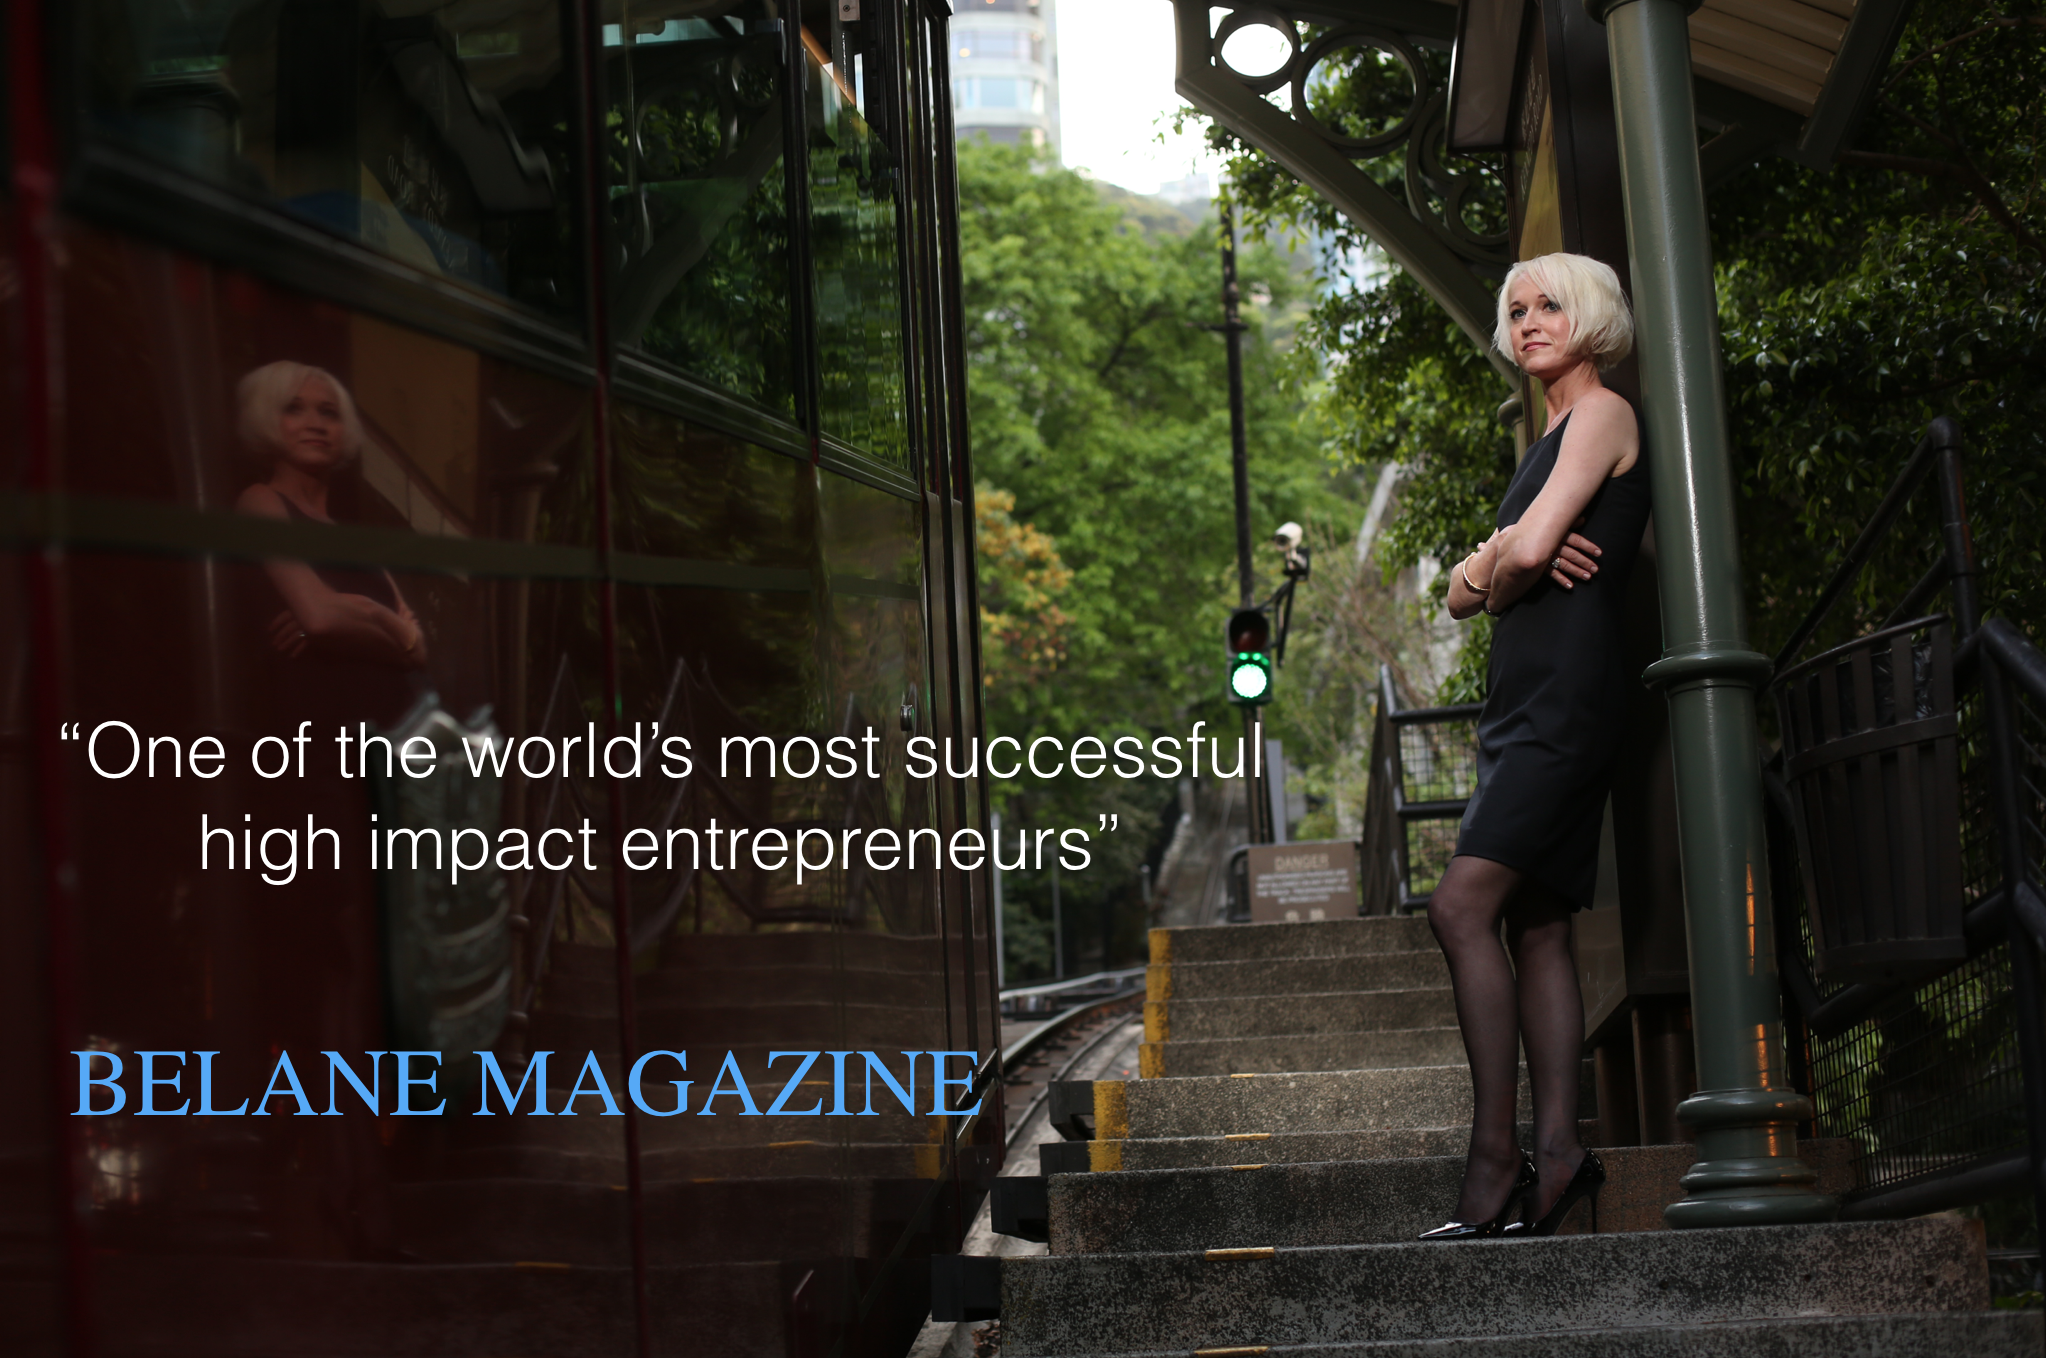 Dr Marie Charles is one of the world's most successful high-impact entrepreneurs